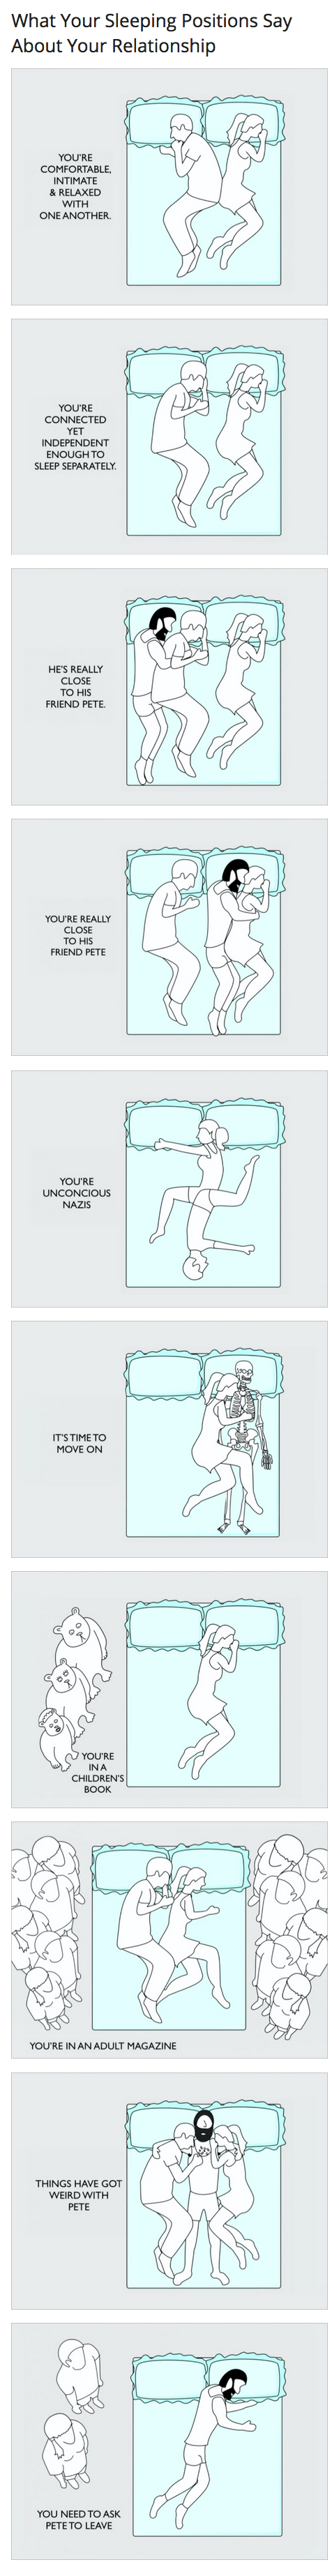 funny dating comic What Your Sleeping Positions Say About Your Relationship